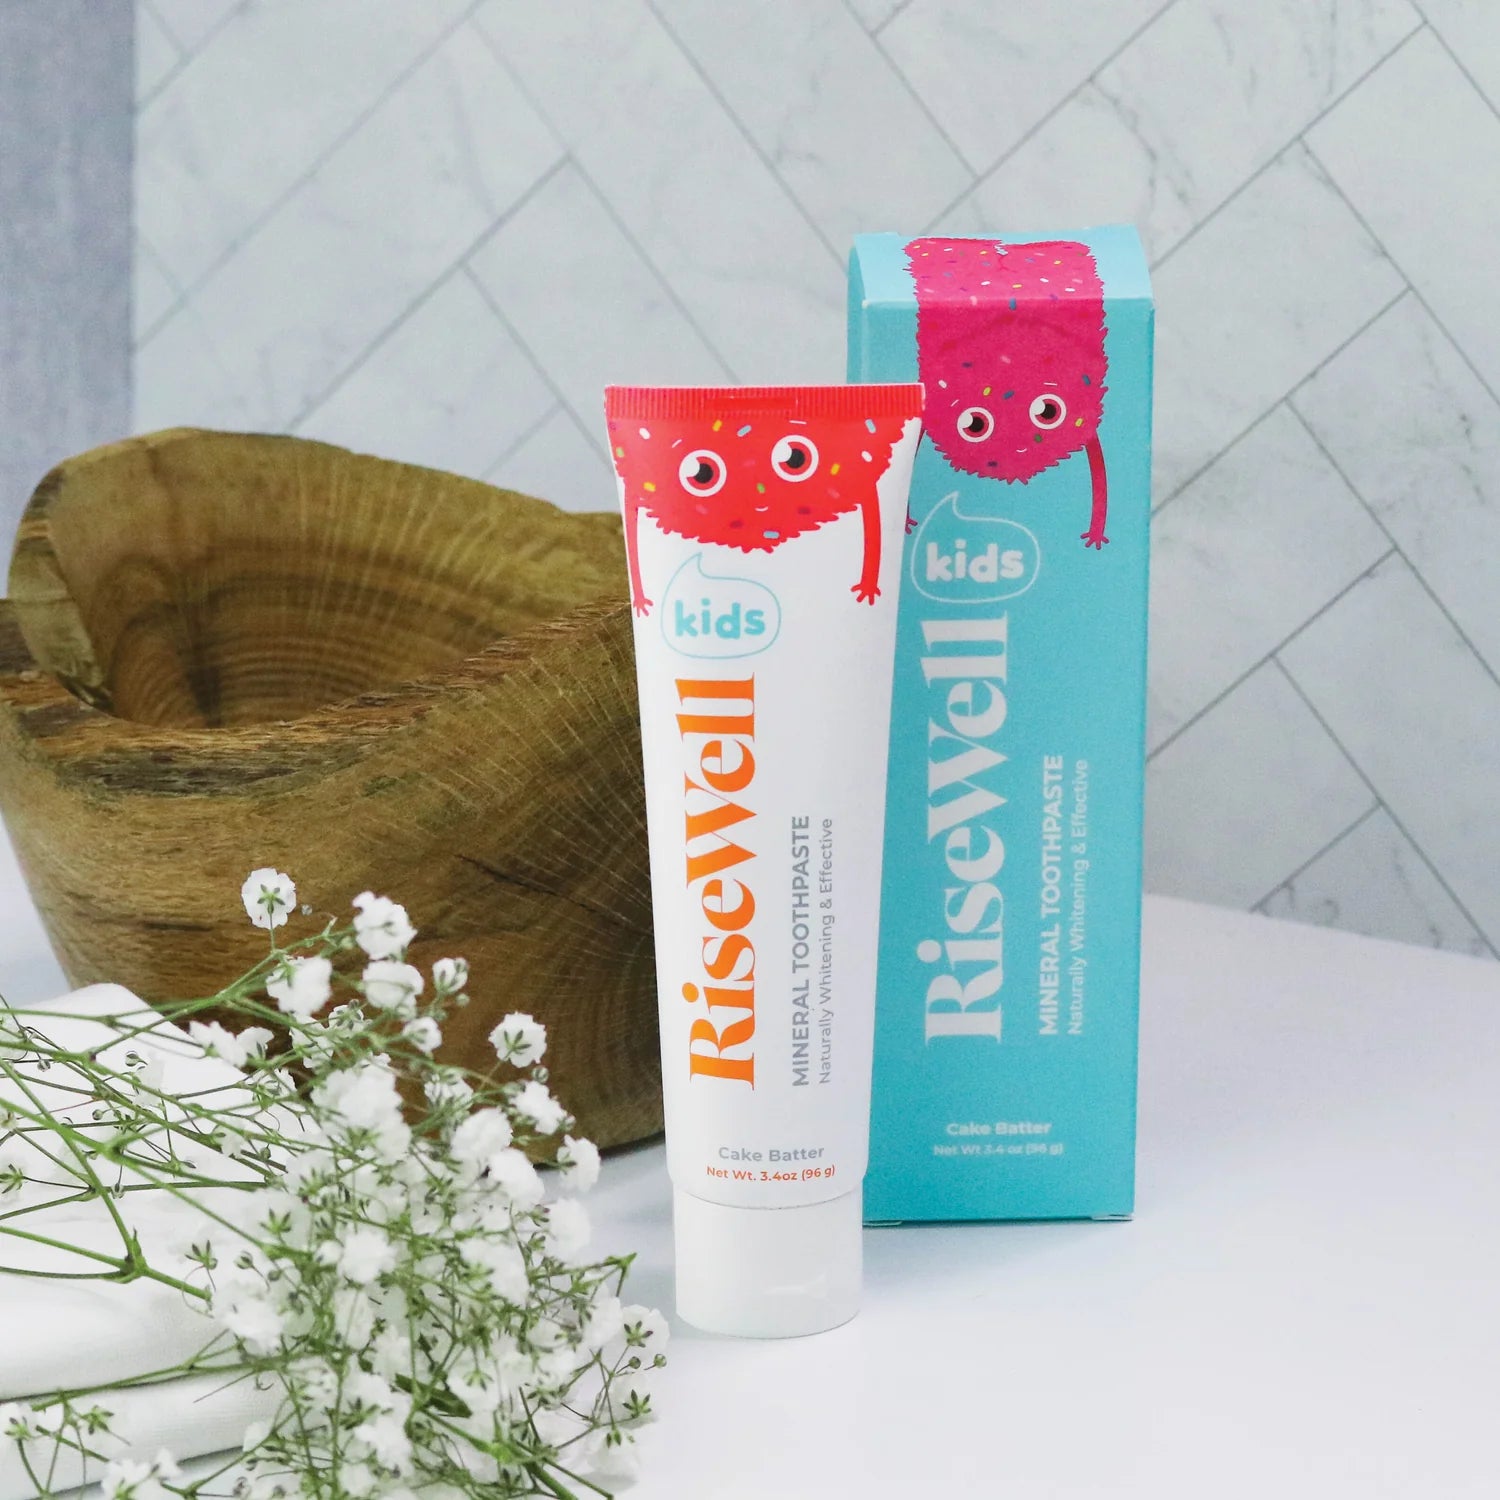 RiseWell | Kids Mineral Toothpaste